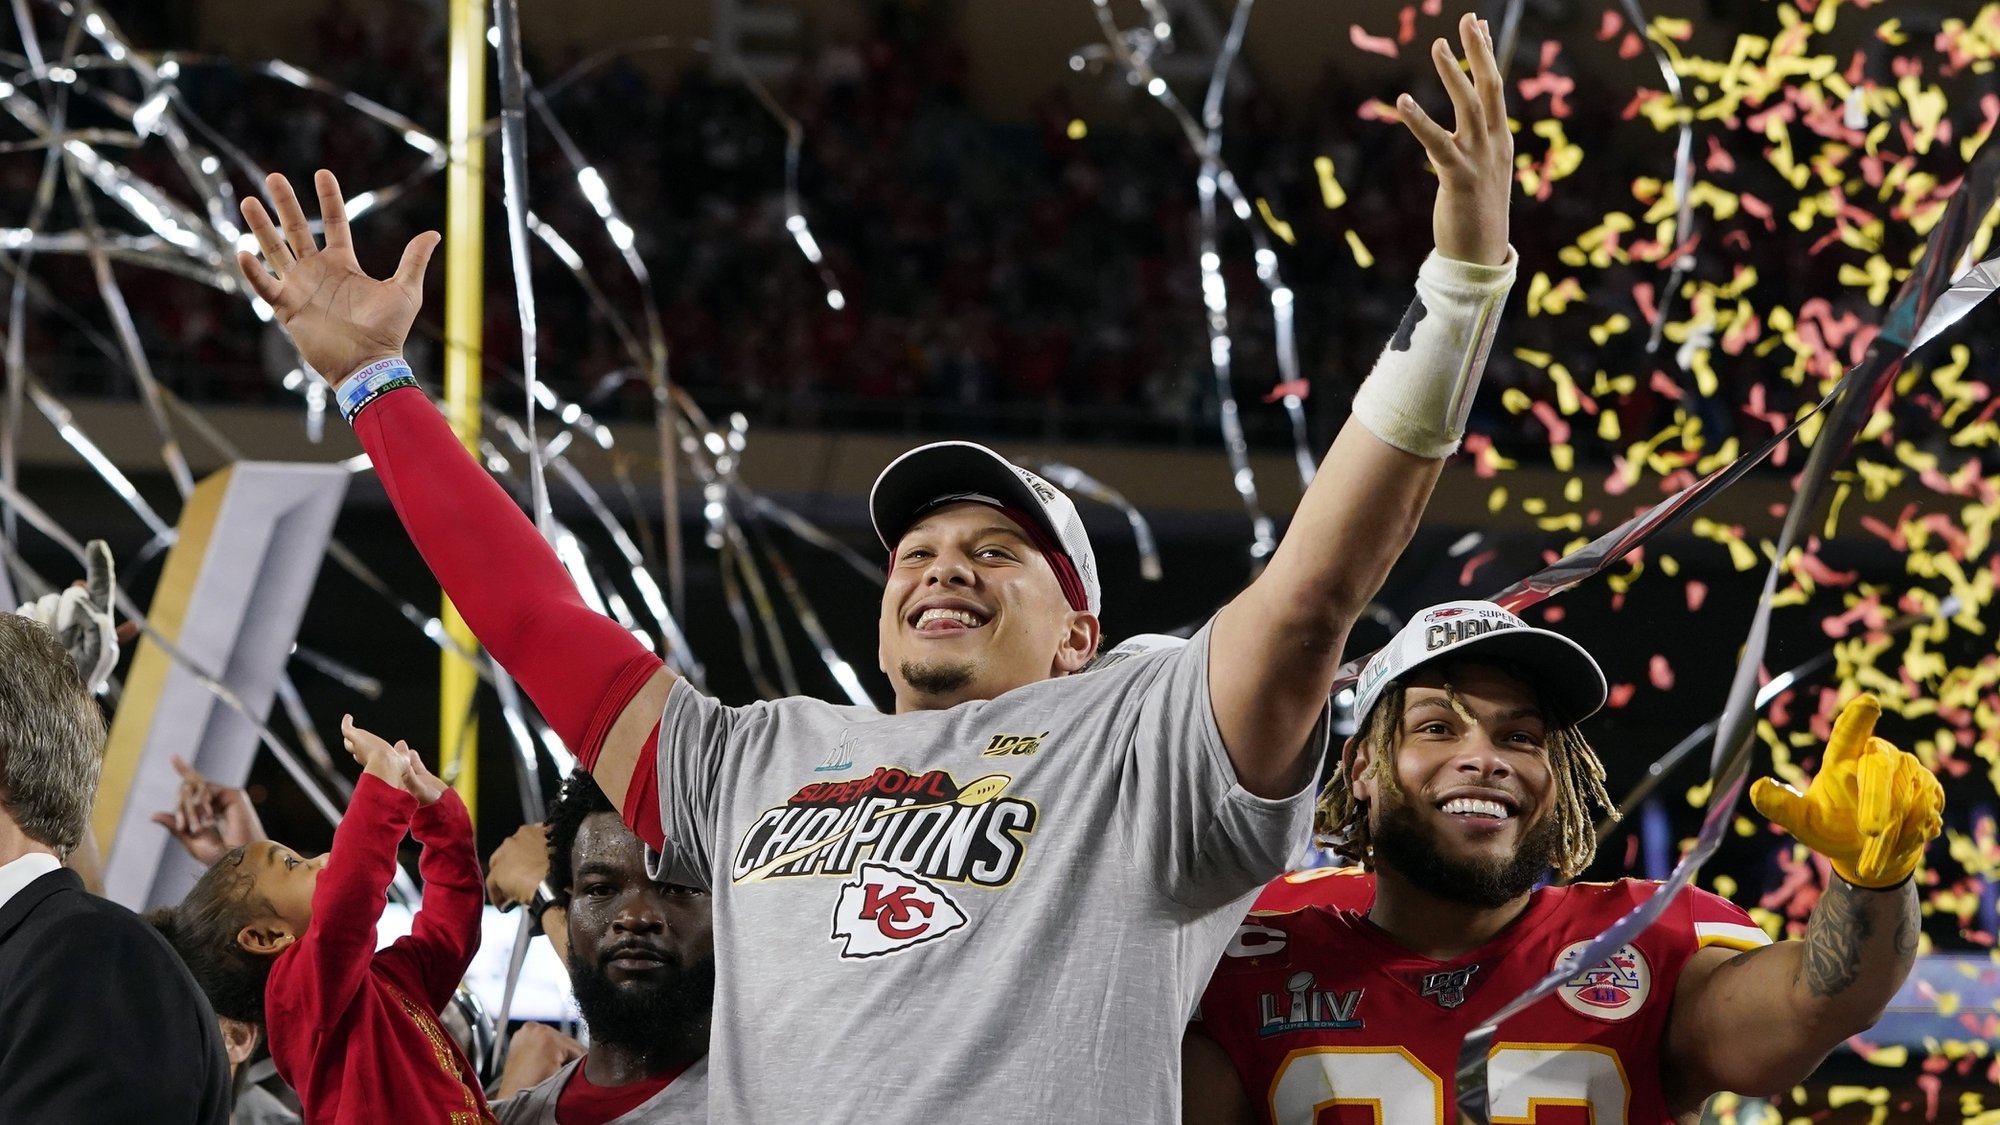 Kansas City Chiefs quarterback Patrick Mahomes, left, and Tyrann Mathieu celebrate after defeating the San Francisco 49ers in Super Bowl LIV on Sunday in Miami.